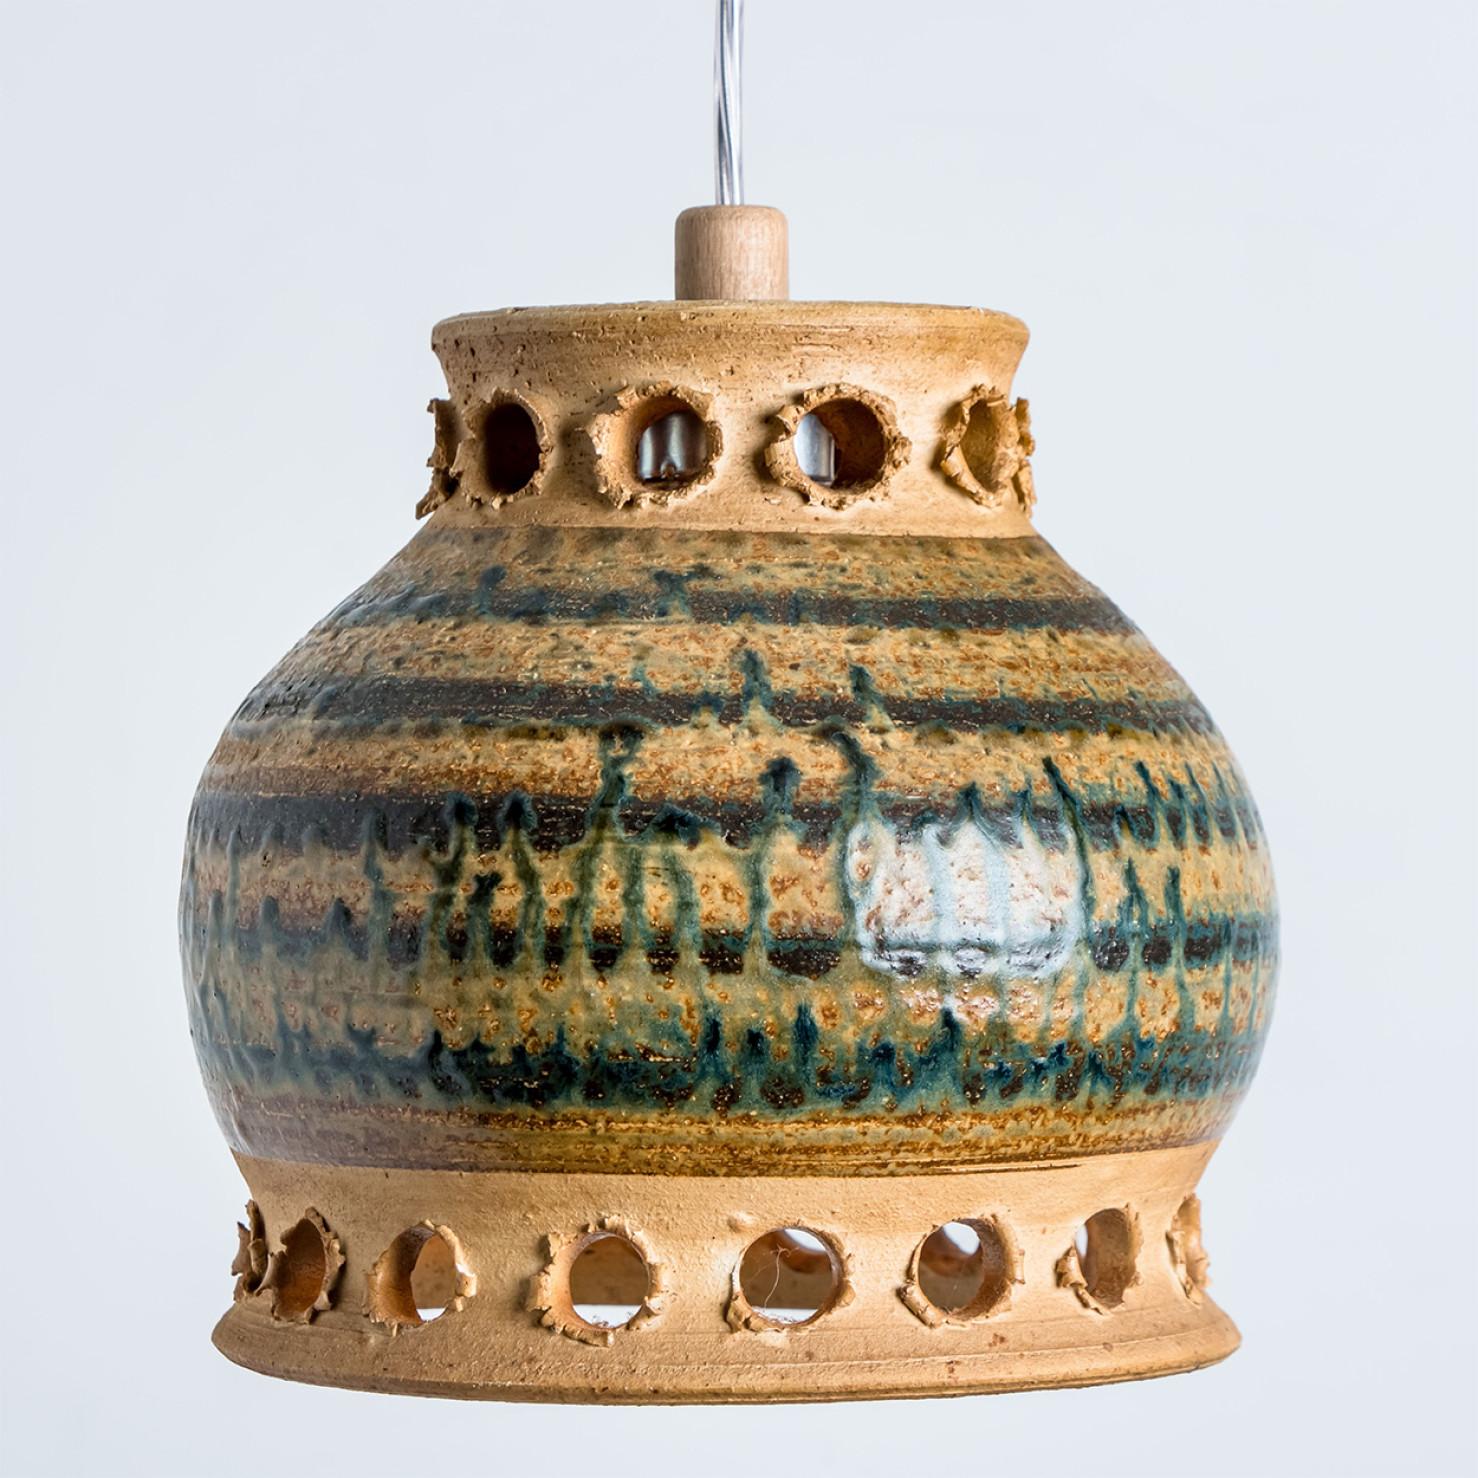 Stunning round hanging lamp with an unusual shape, made with rich brown and green colored ceramics, manufactured in the 1970s in Denmark. We also have a multitude of unique colored ceramic light sets and arrangements, all available on the